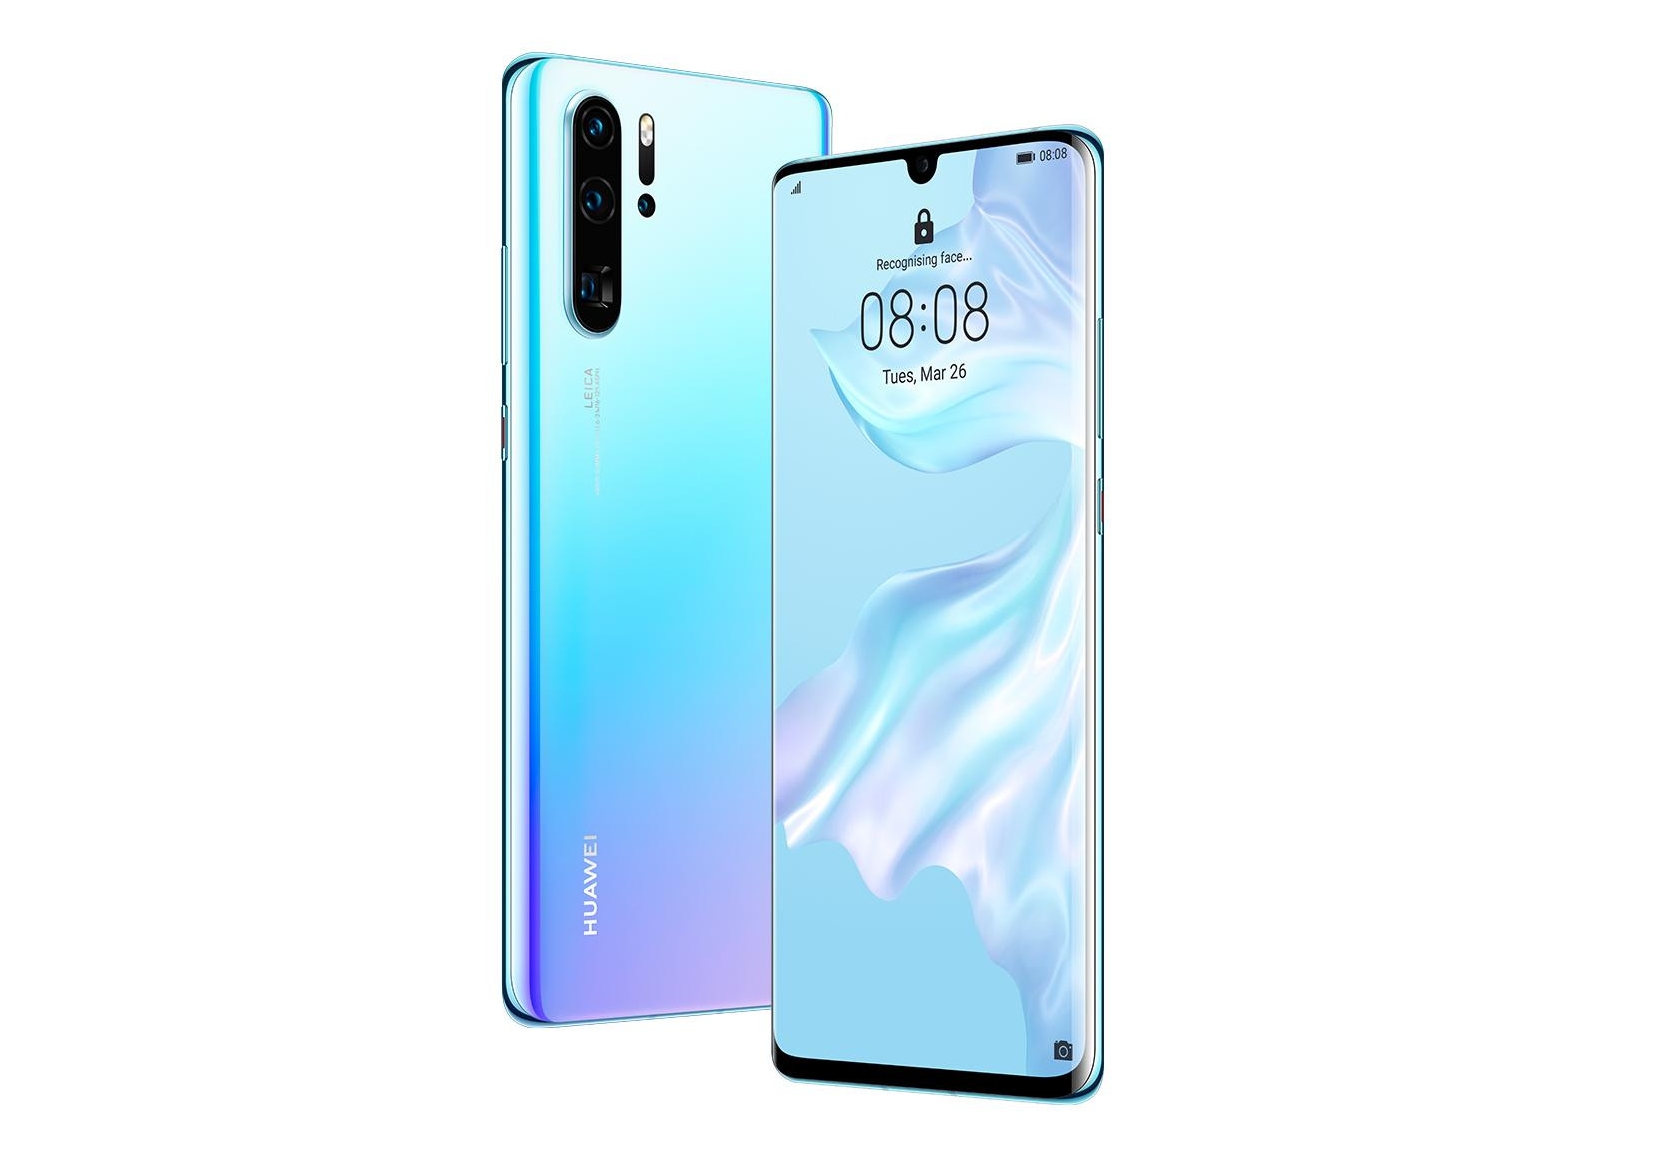 Huawei P30 and Huawei P30 Pro received an important software update